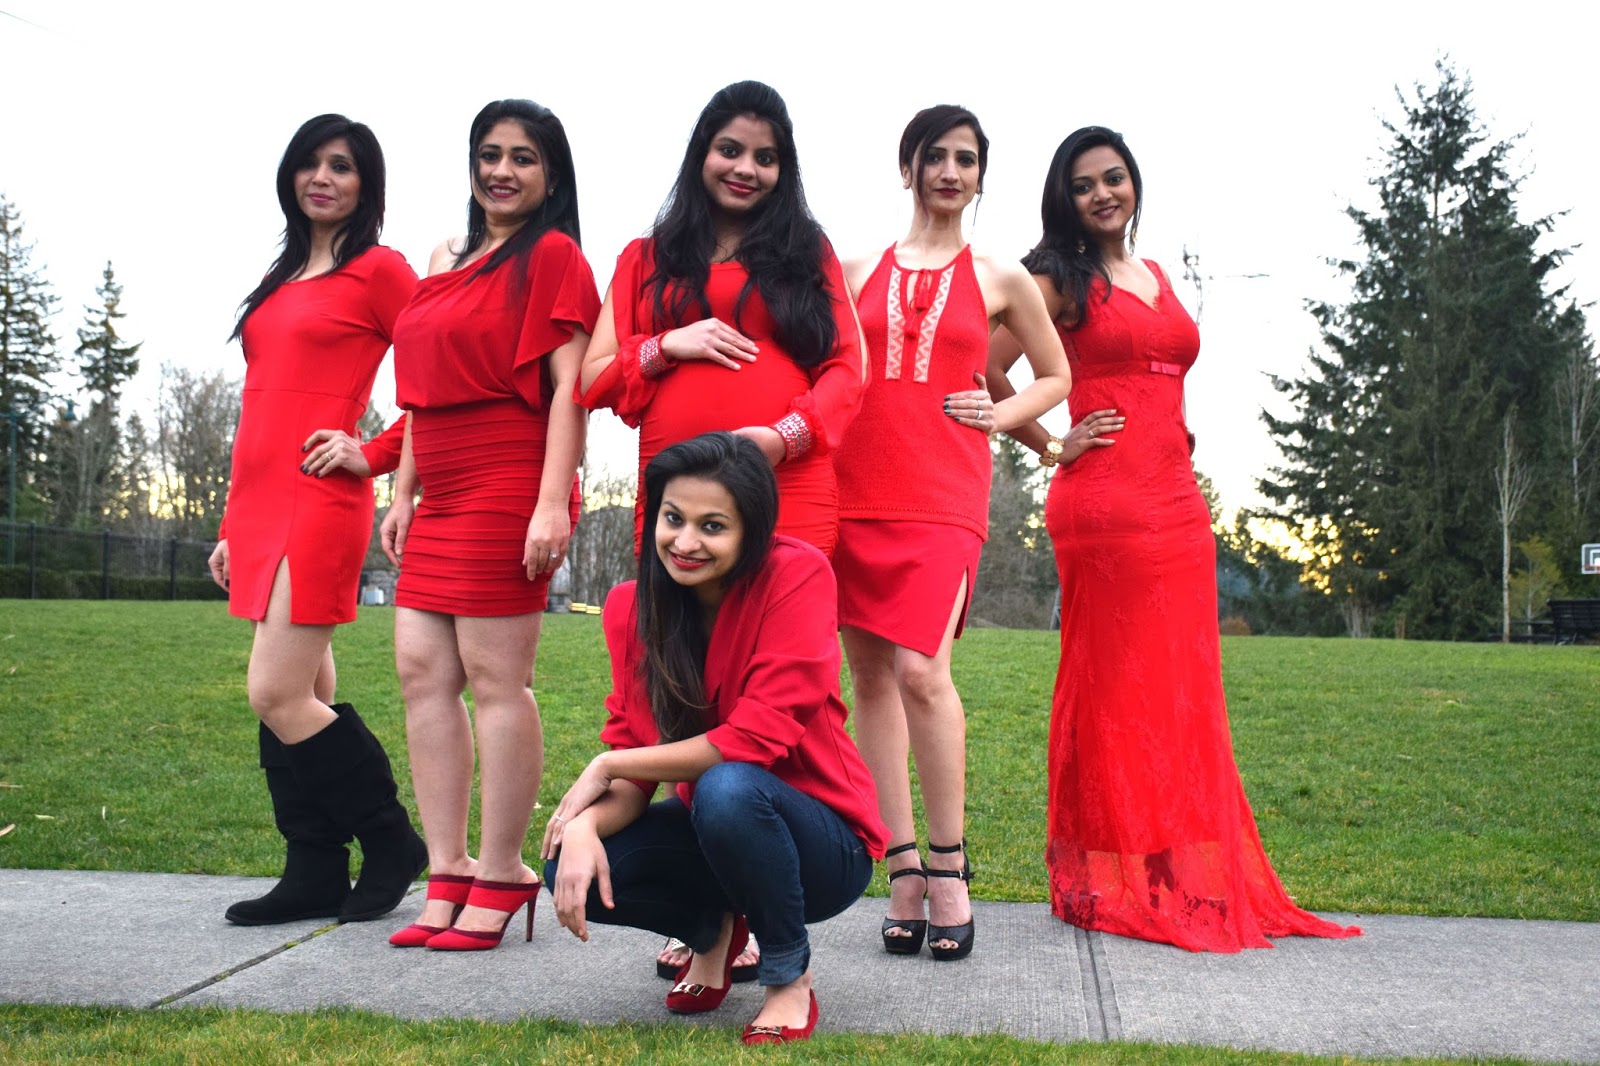 gals all wearing red dress, group pic of indian gals, different types of red dresses, Seattle indian ladies, red lipstick on brown skin  